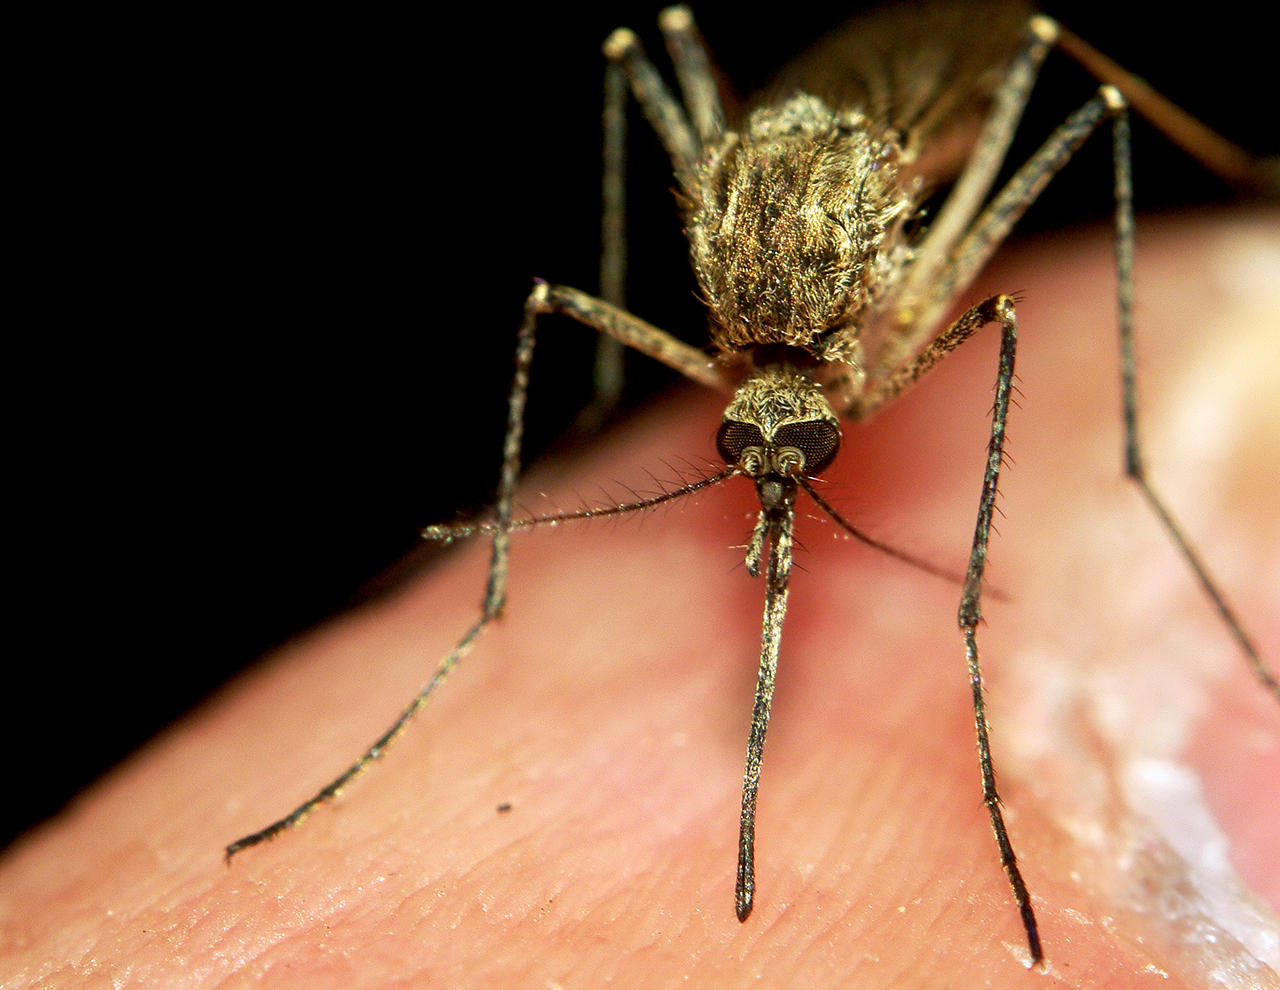 West Nile virus confirmed in Northampton County for 2019